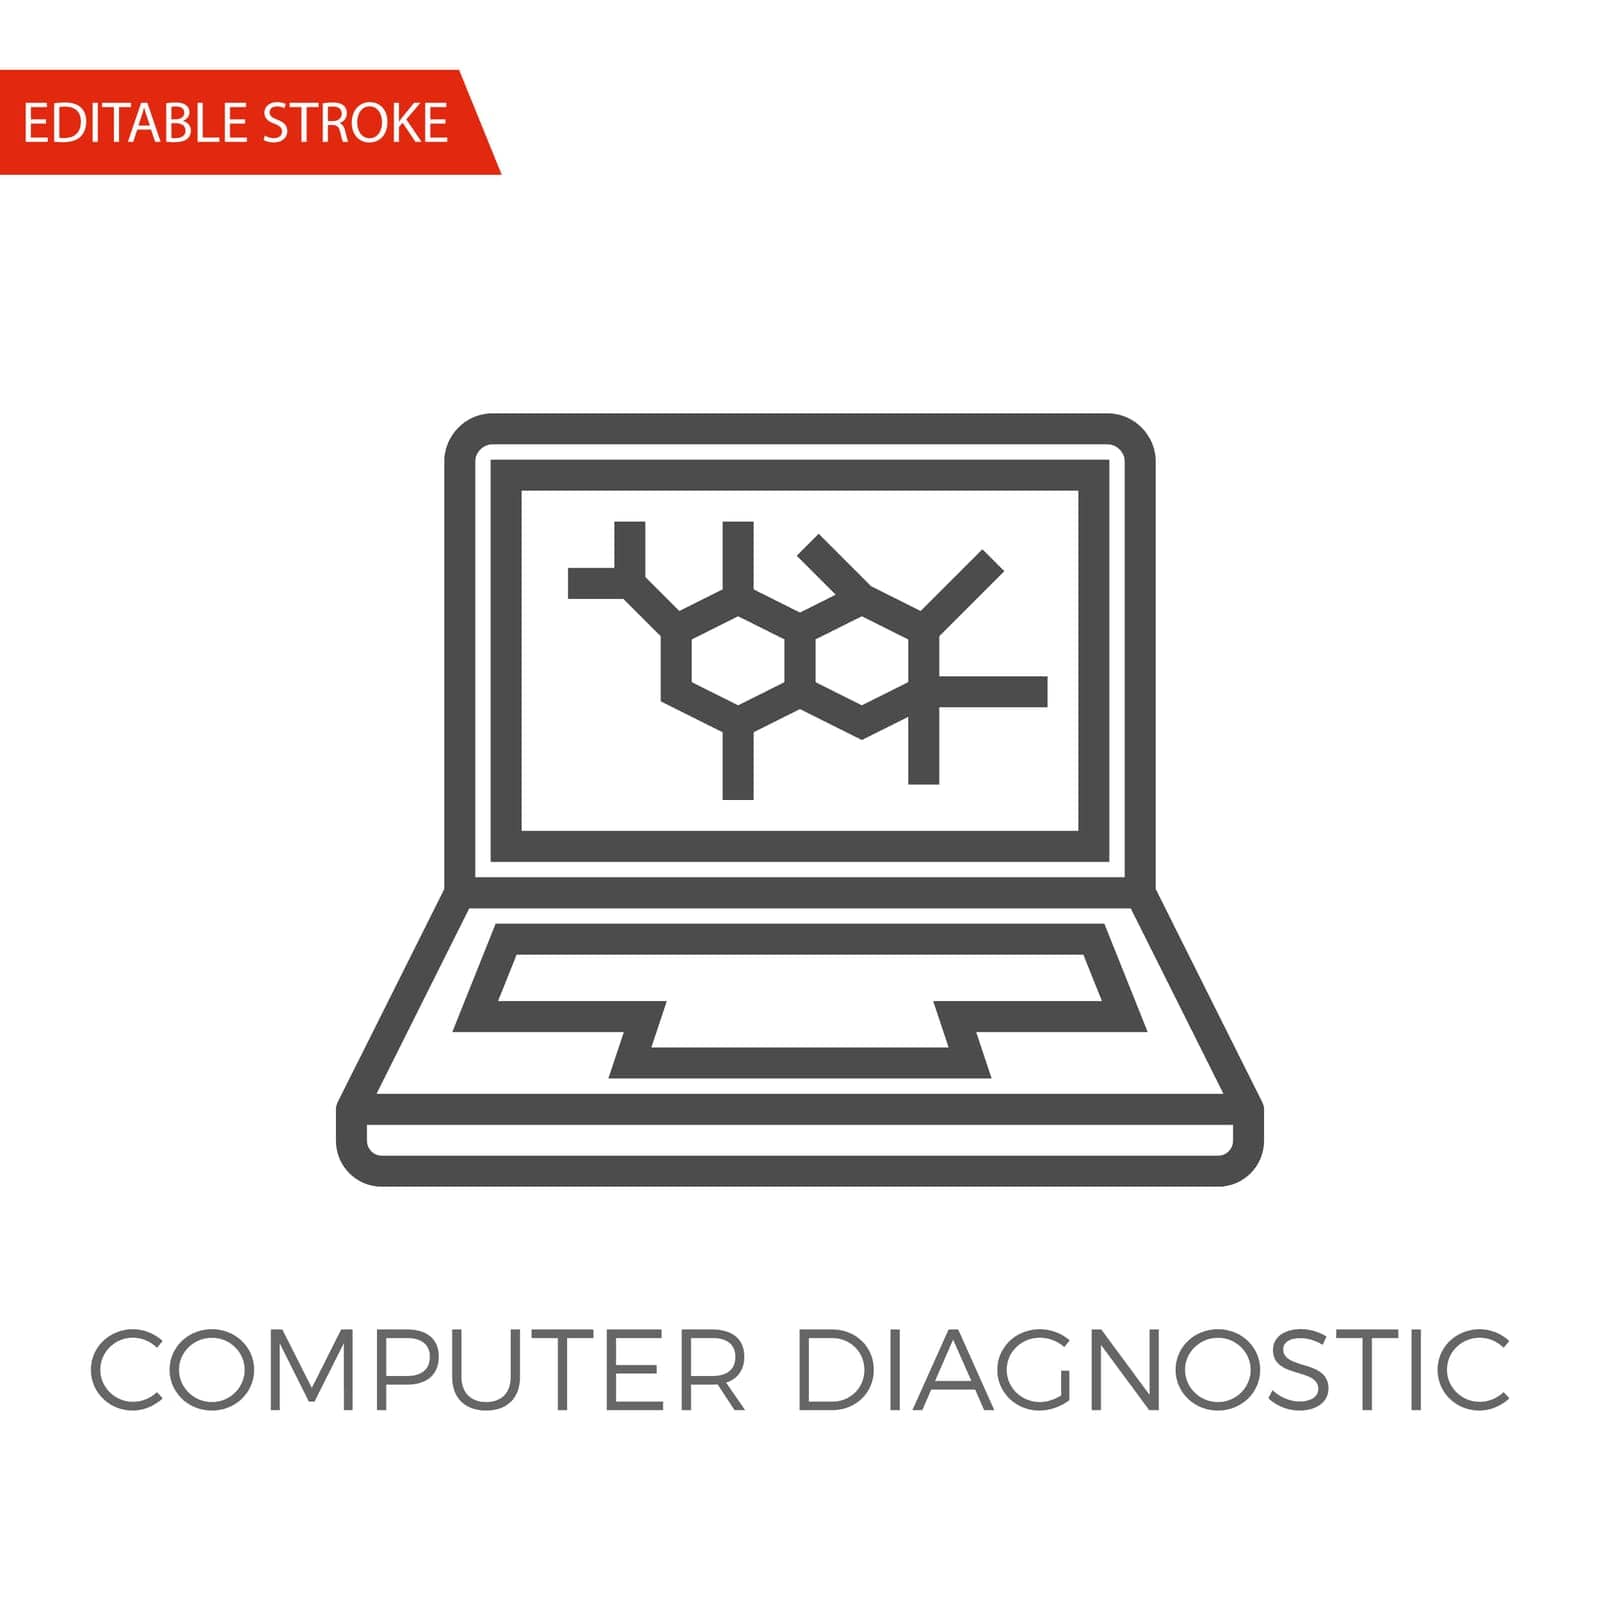 Computer Diagnostic Thin Line Vector Icon. Flat Icon Isolated on the White Background. Editable Stroke EPS file. Vector illustration.